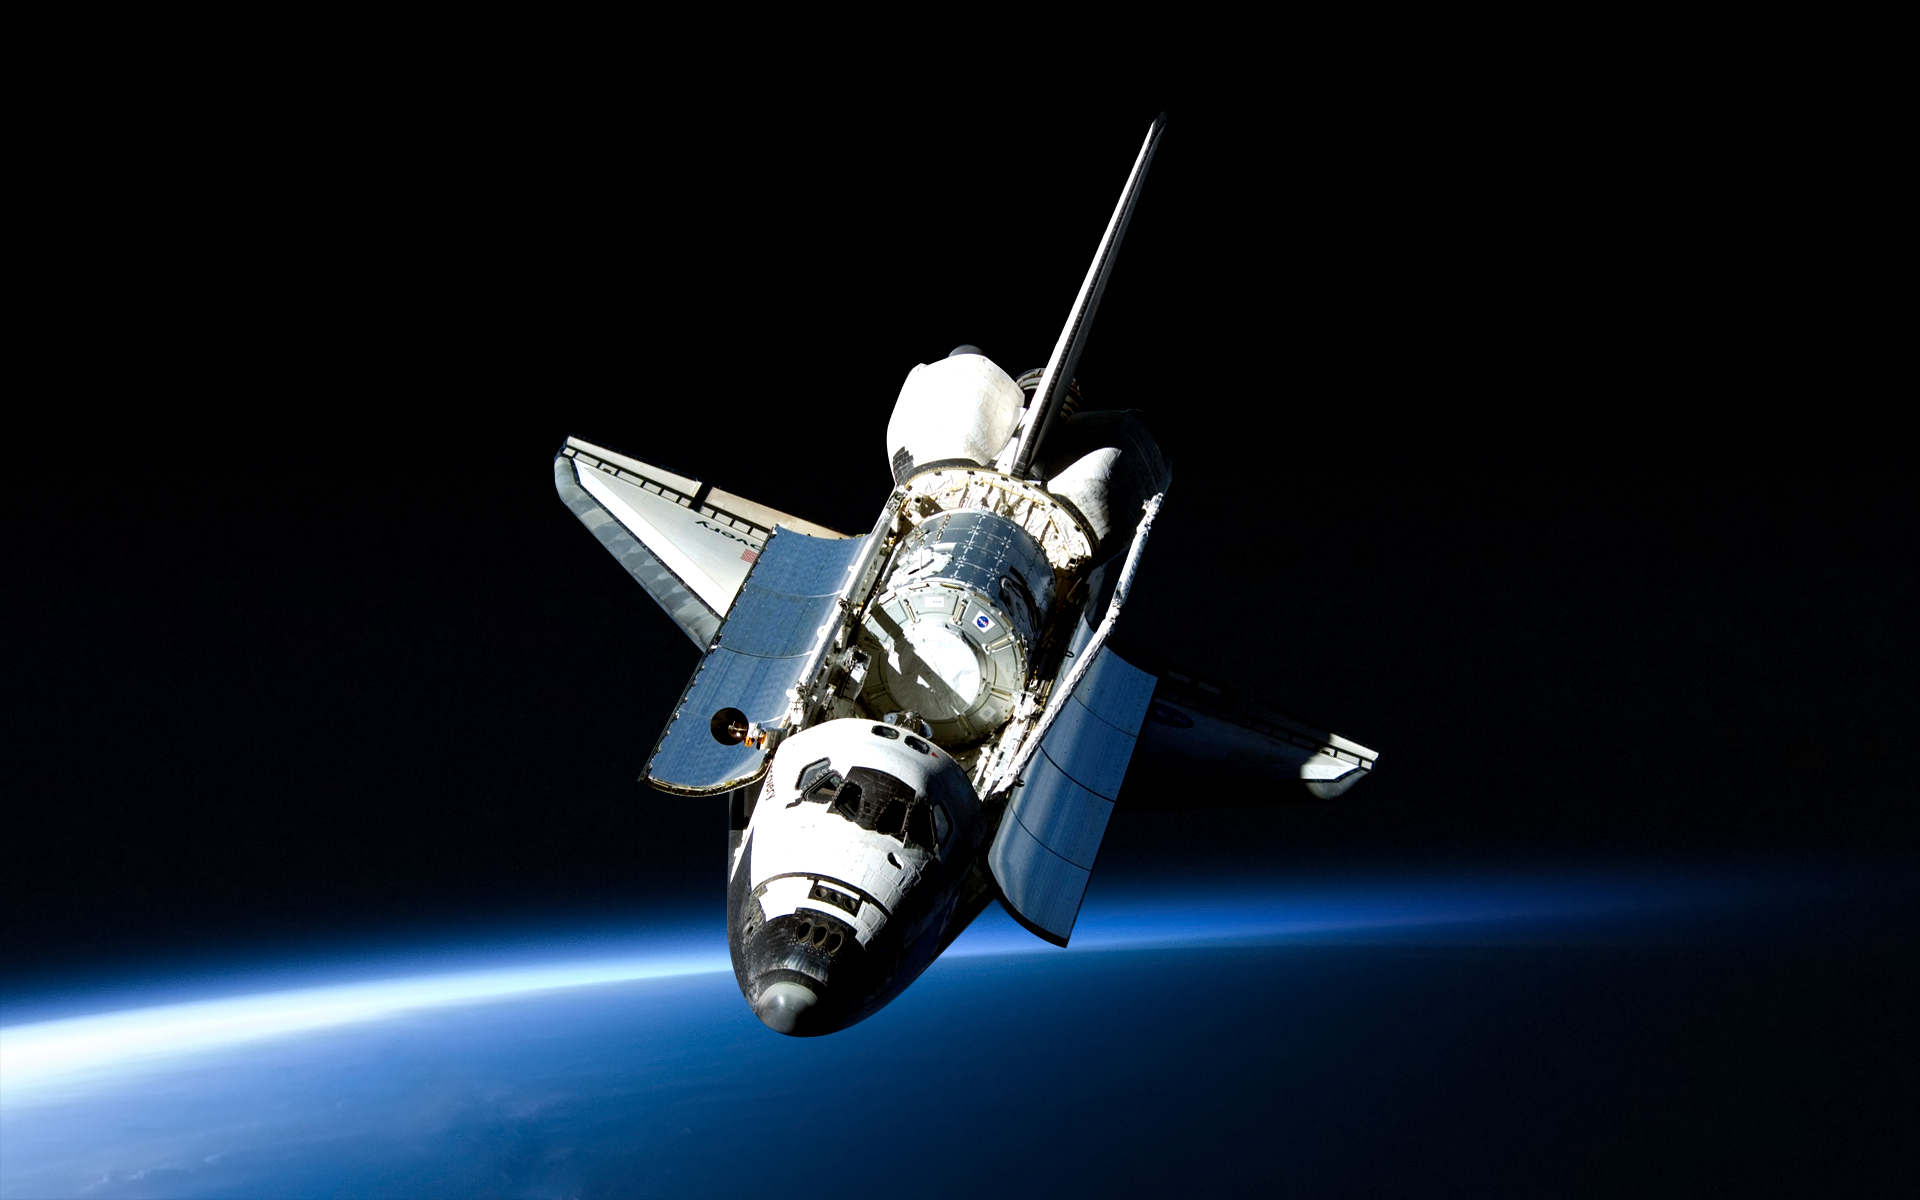 Space Shuttle Discovery Posing For A Great Wallpaper I